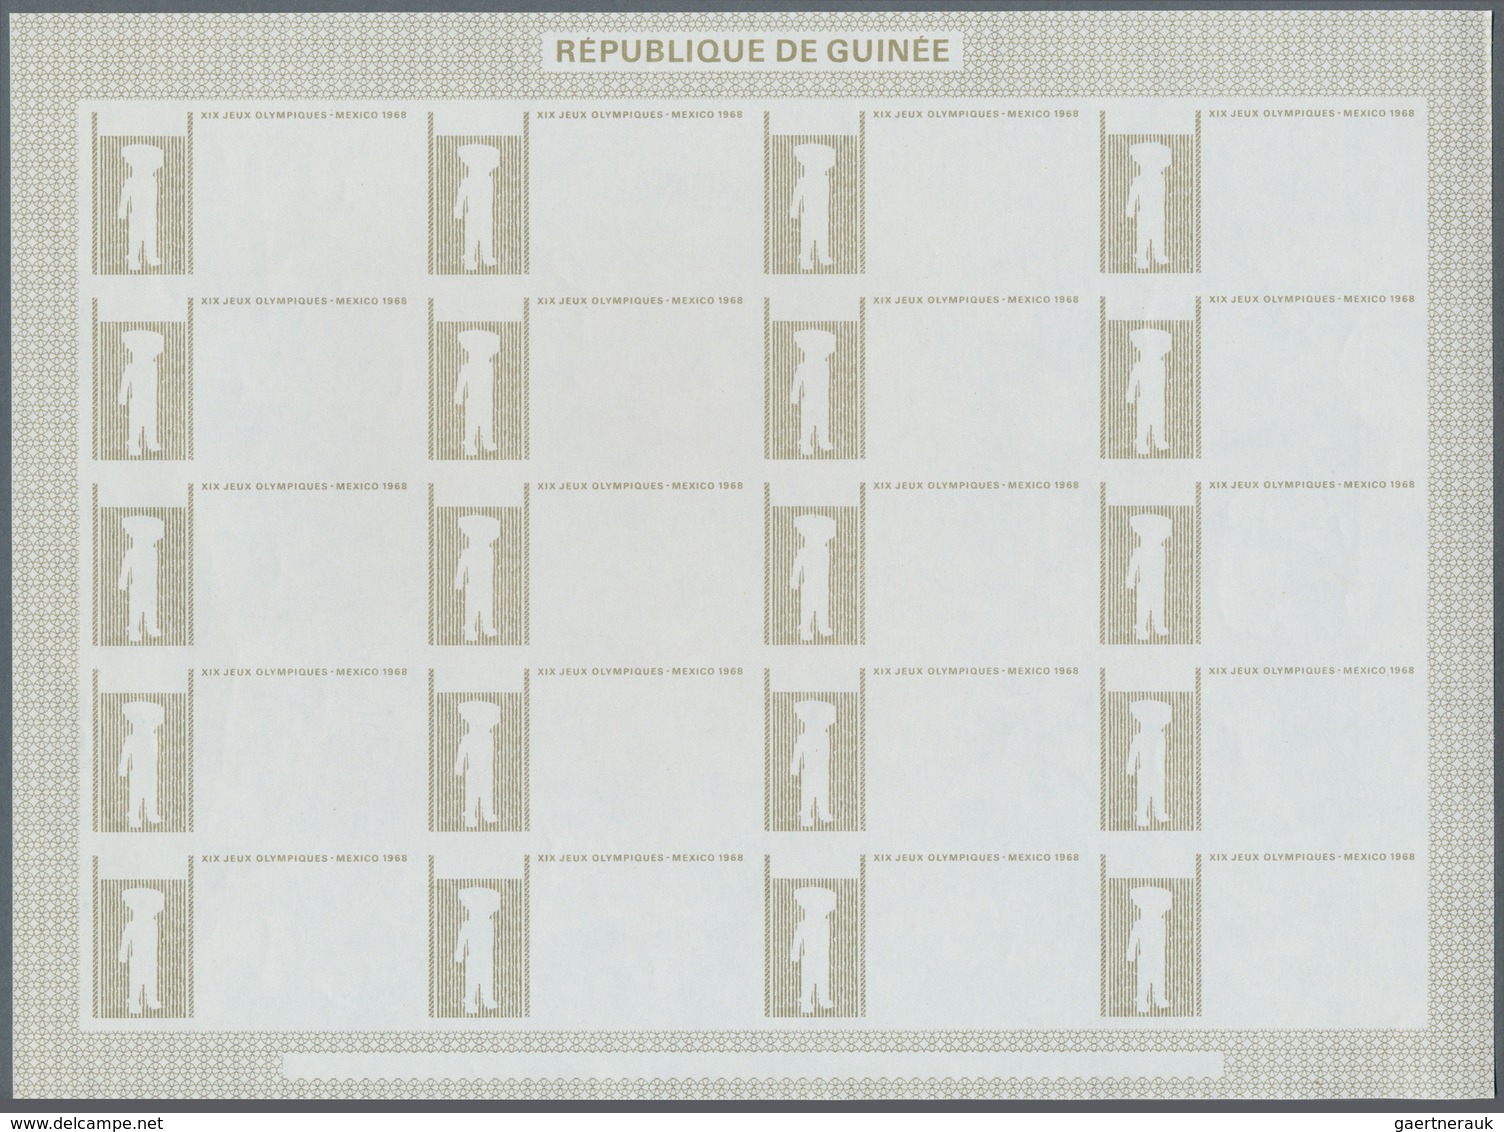 Thematik: Olympische Spiele / olympic games: 1969, Guinea. Progressive proofs set of sheets for the